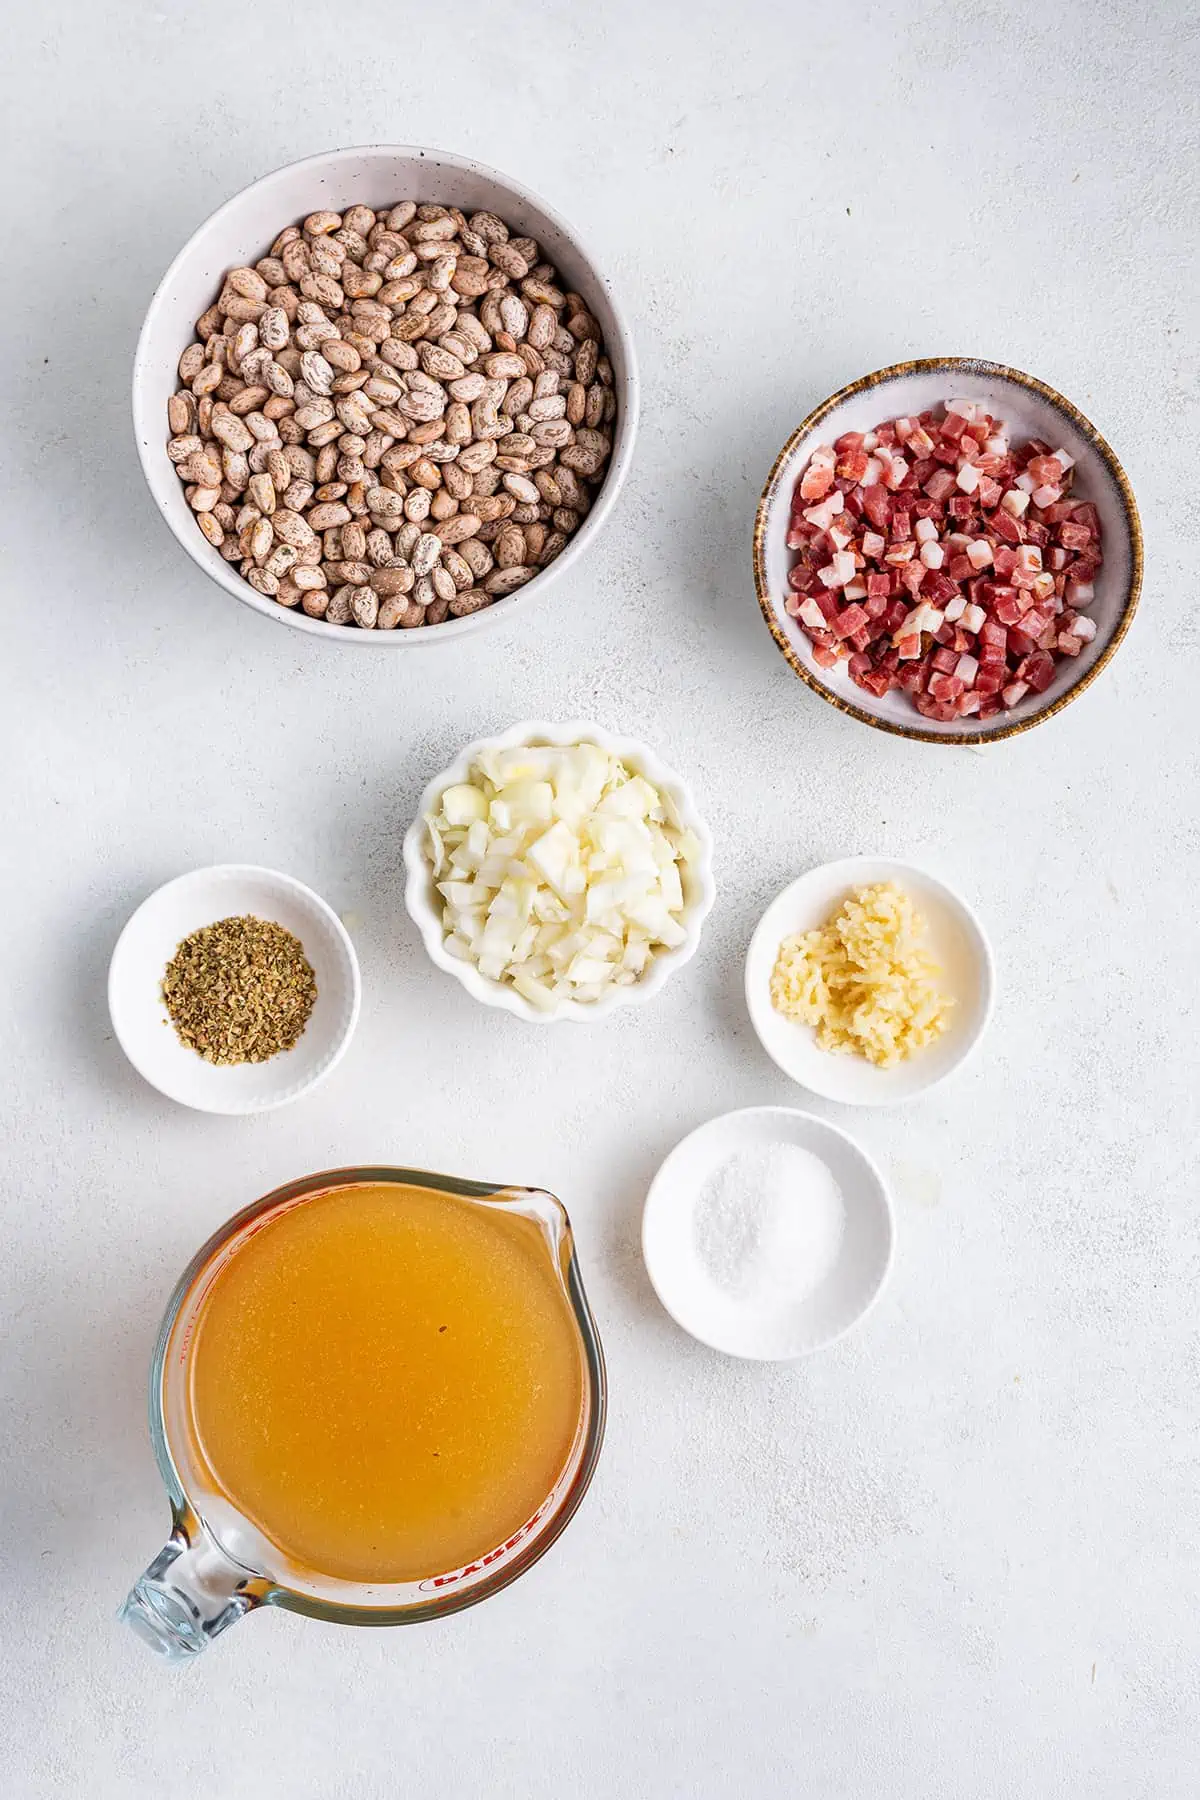 Overhead view of the ingredients needed for Instant Pot refried beans: A bowl of dried pinto beans, a bowl of diced raw bacon, a bowl of diced onions, a bowl of minced garlic, a bowl of salt, a bowl of oregano, and a pyrex of chicken broth